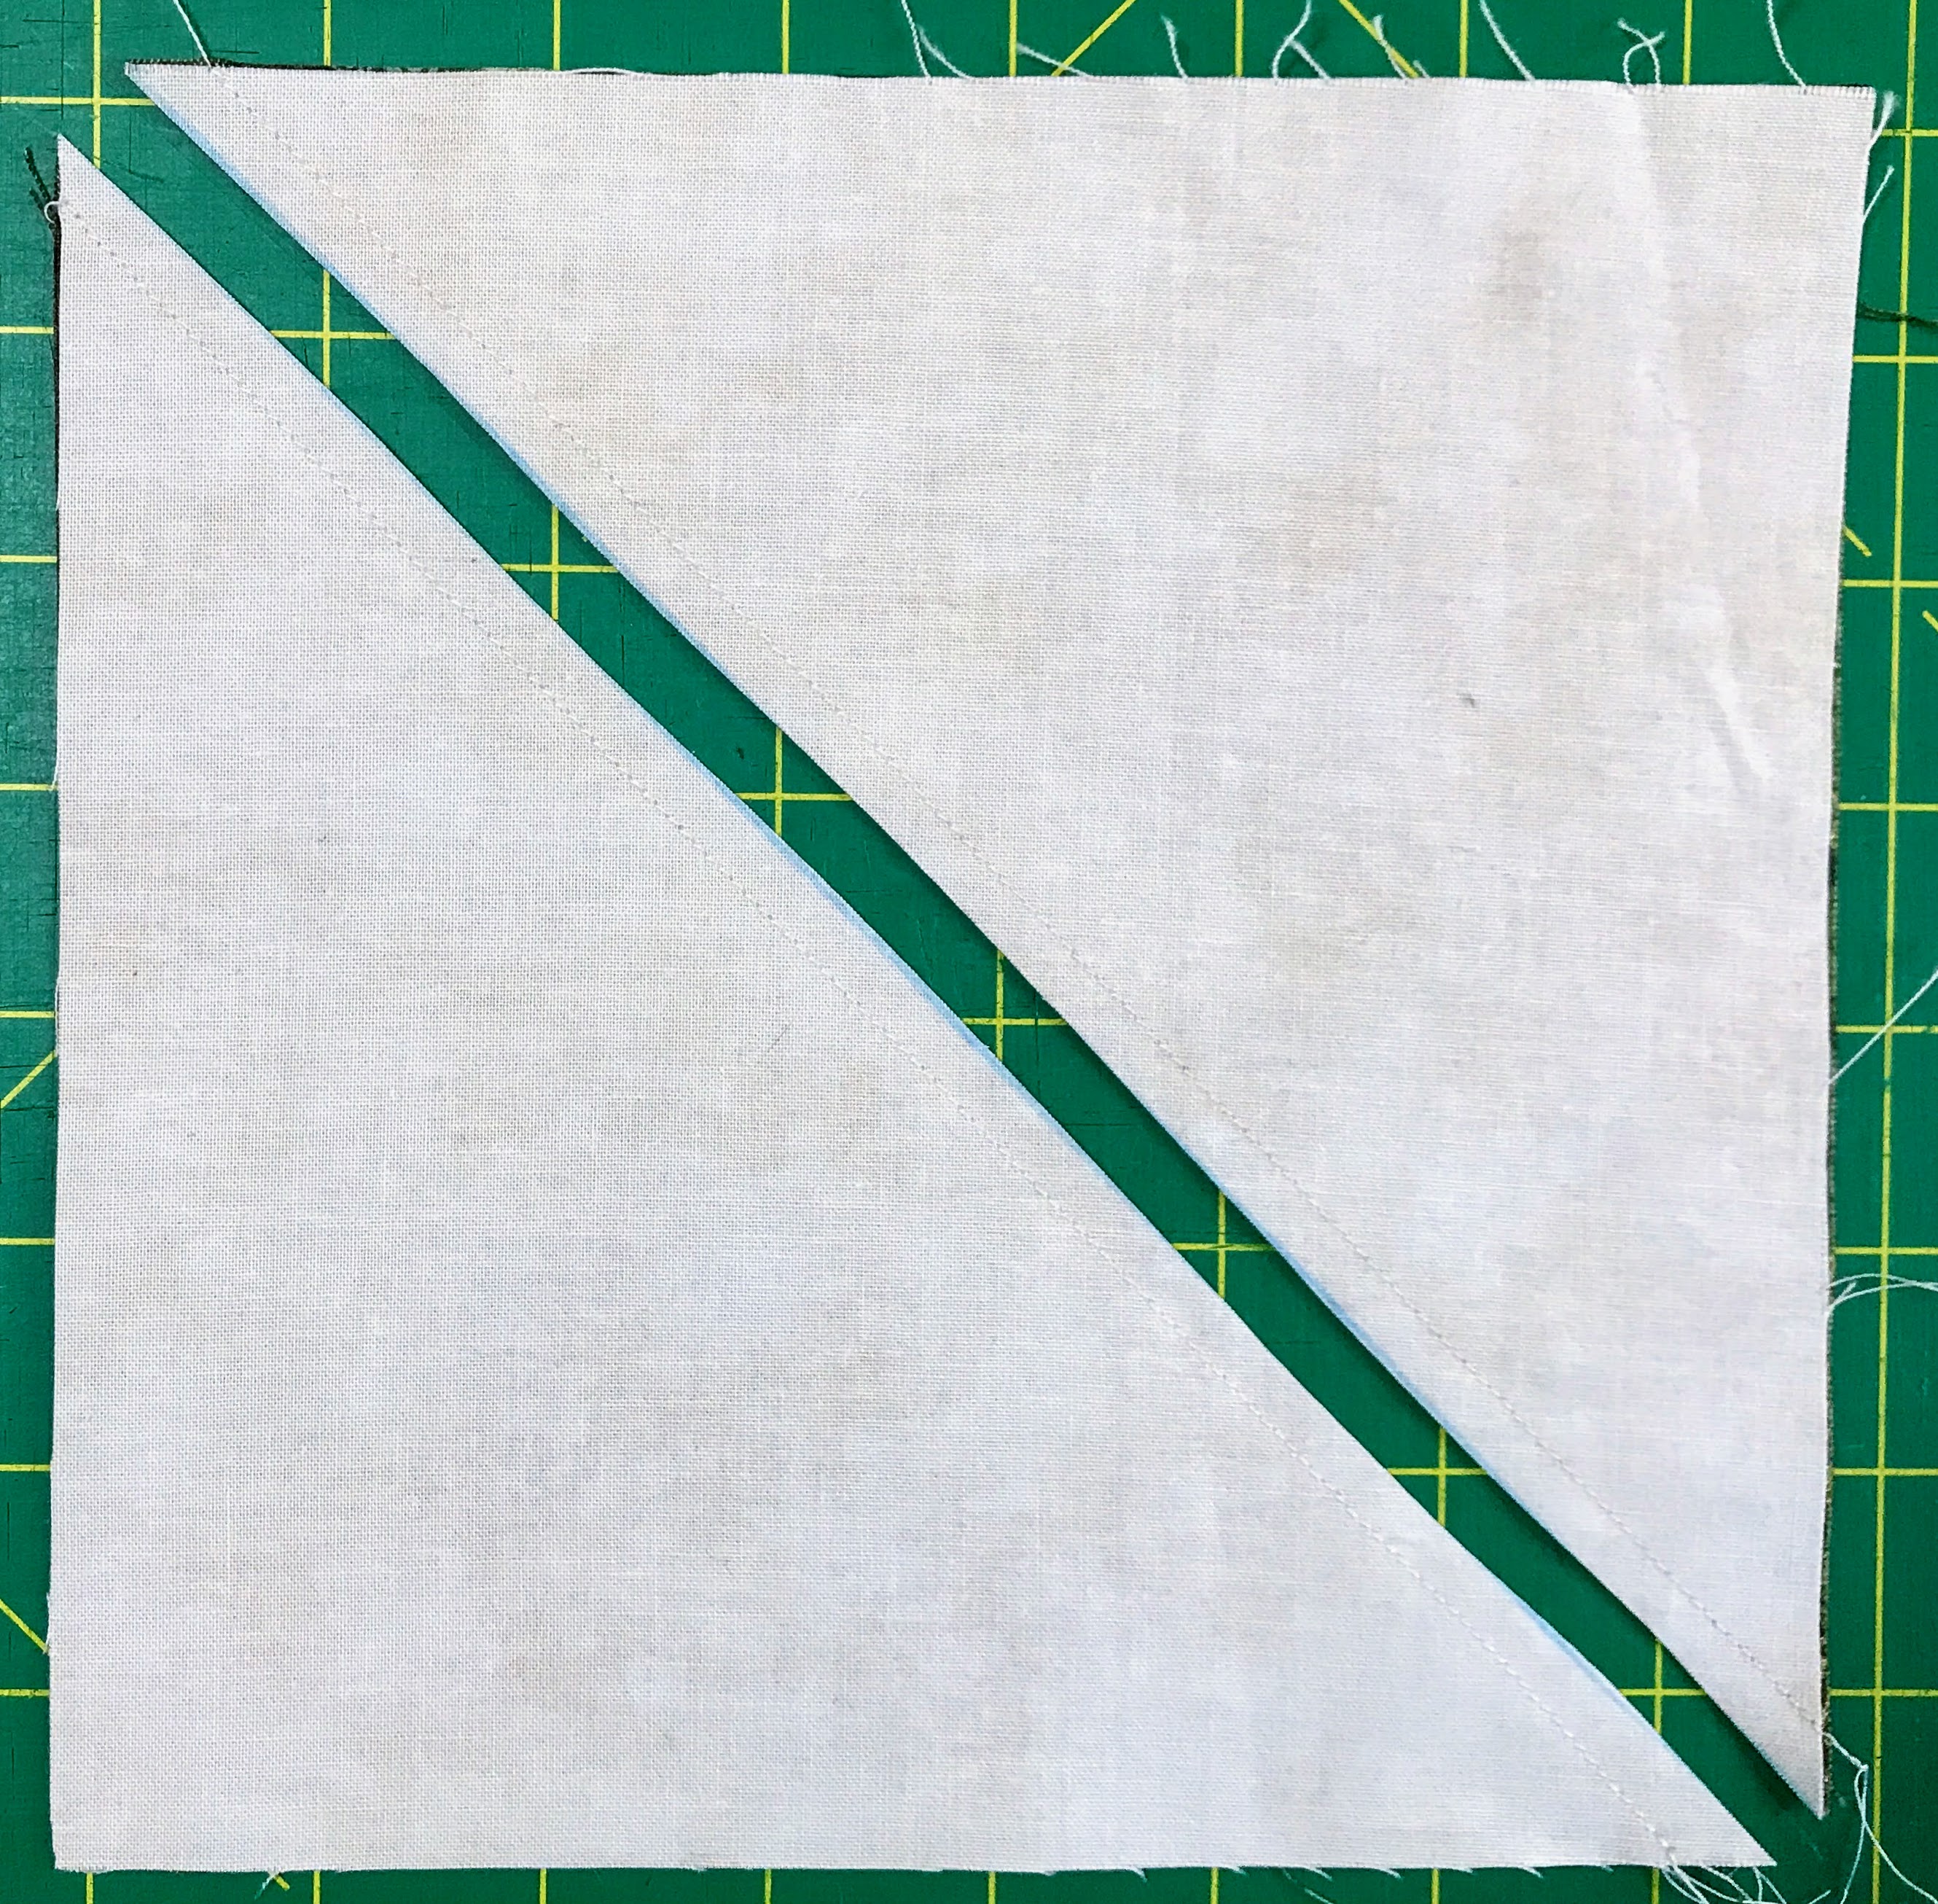 To make an HST, sew 1/4" on either side of a diagonal line and cut on the line